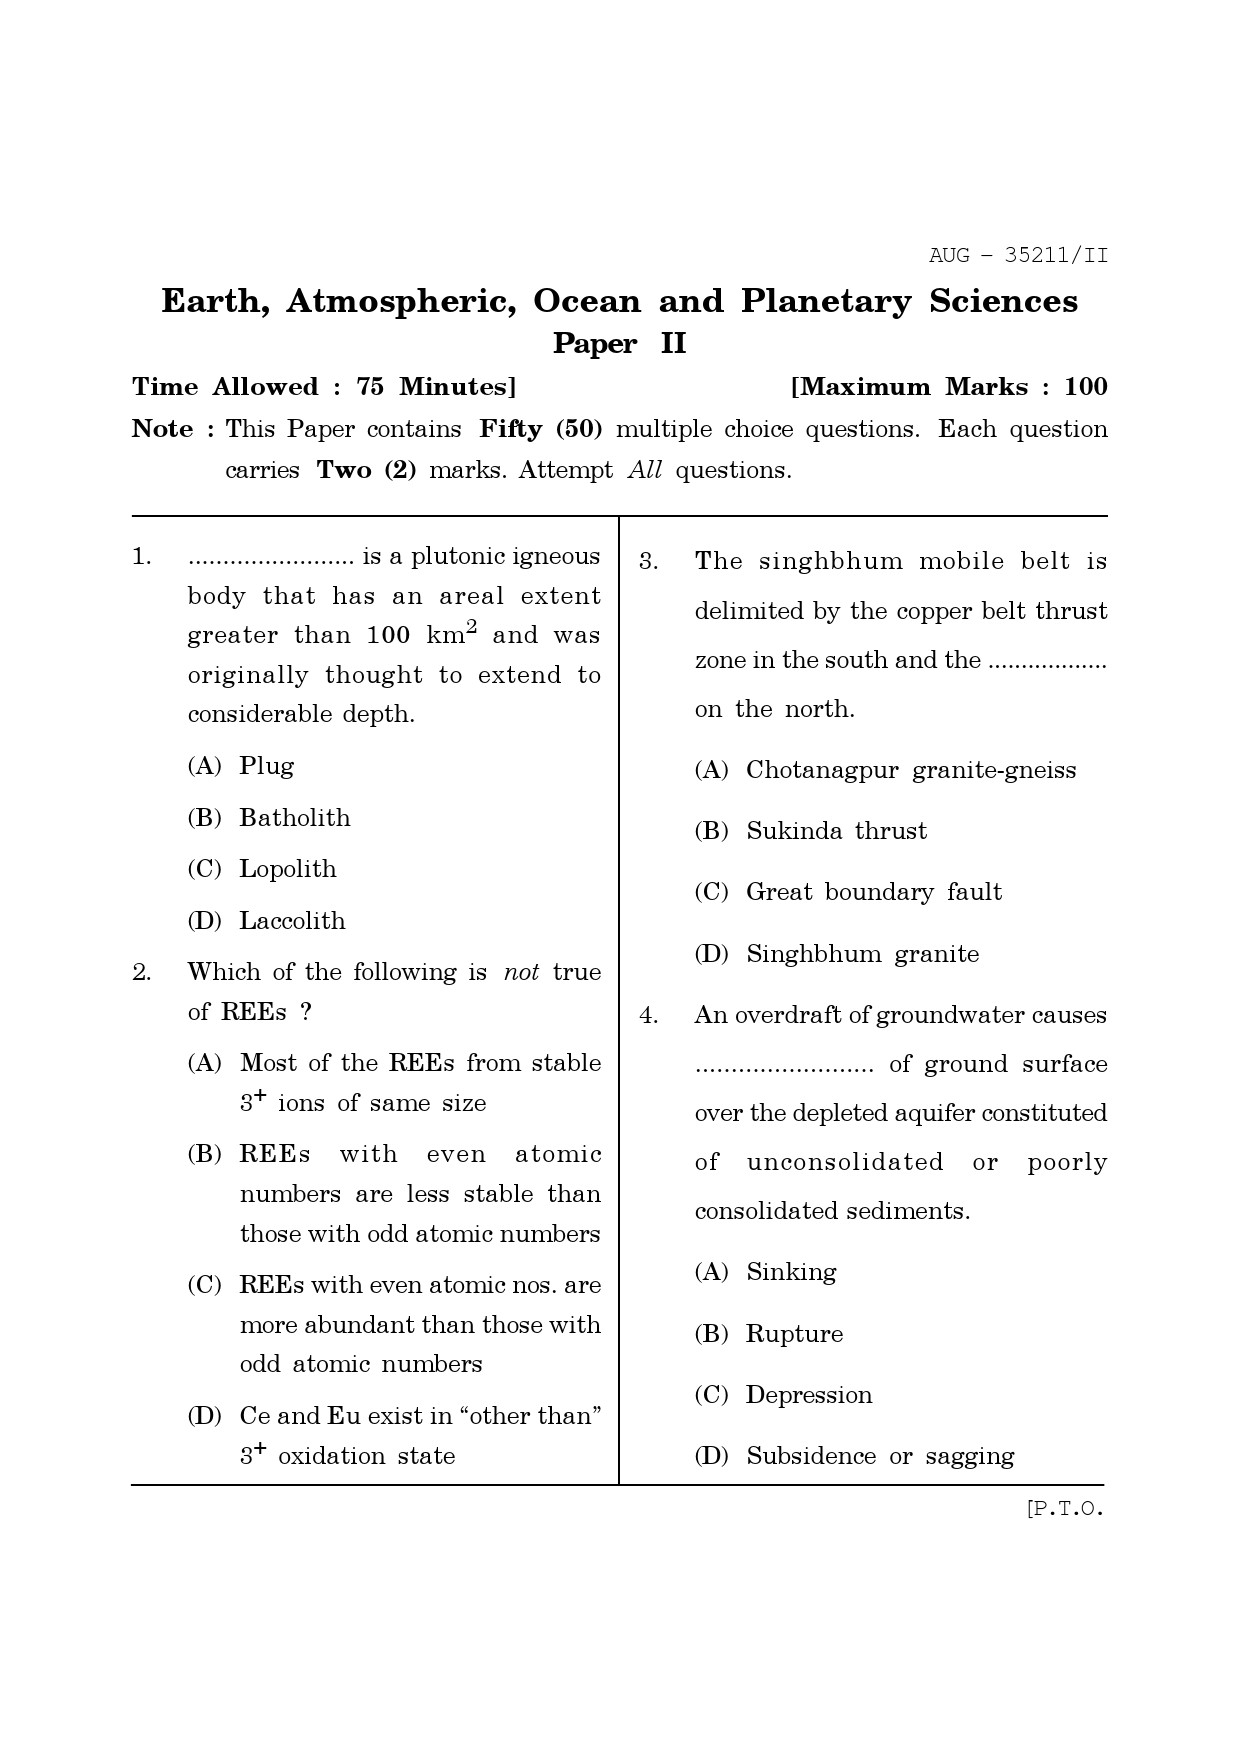 Maharashtra SET Earth Atmospheric Ocean Planetary Science Question Paper II August 2011 1